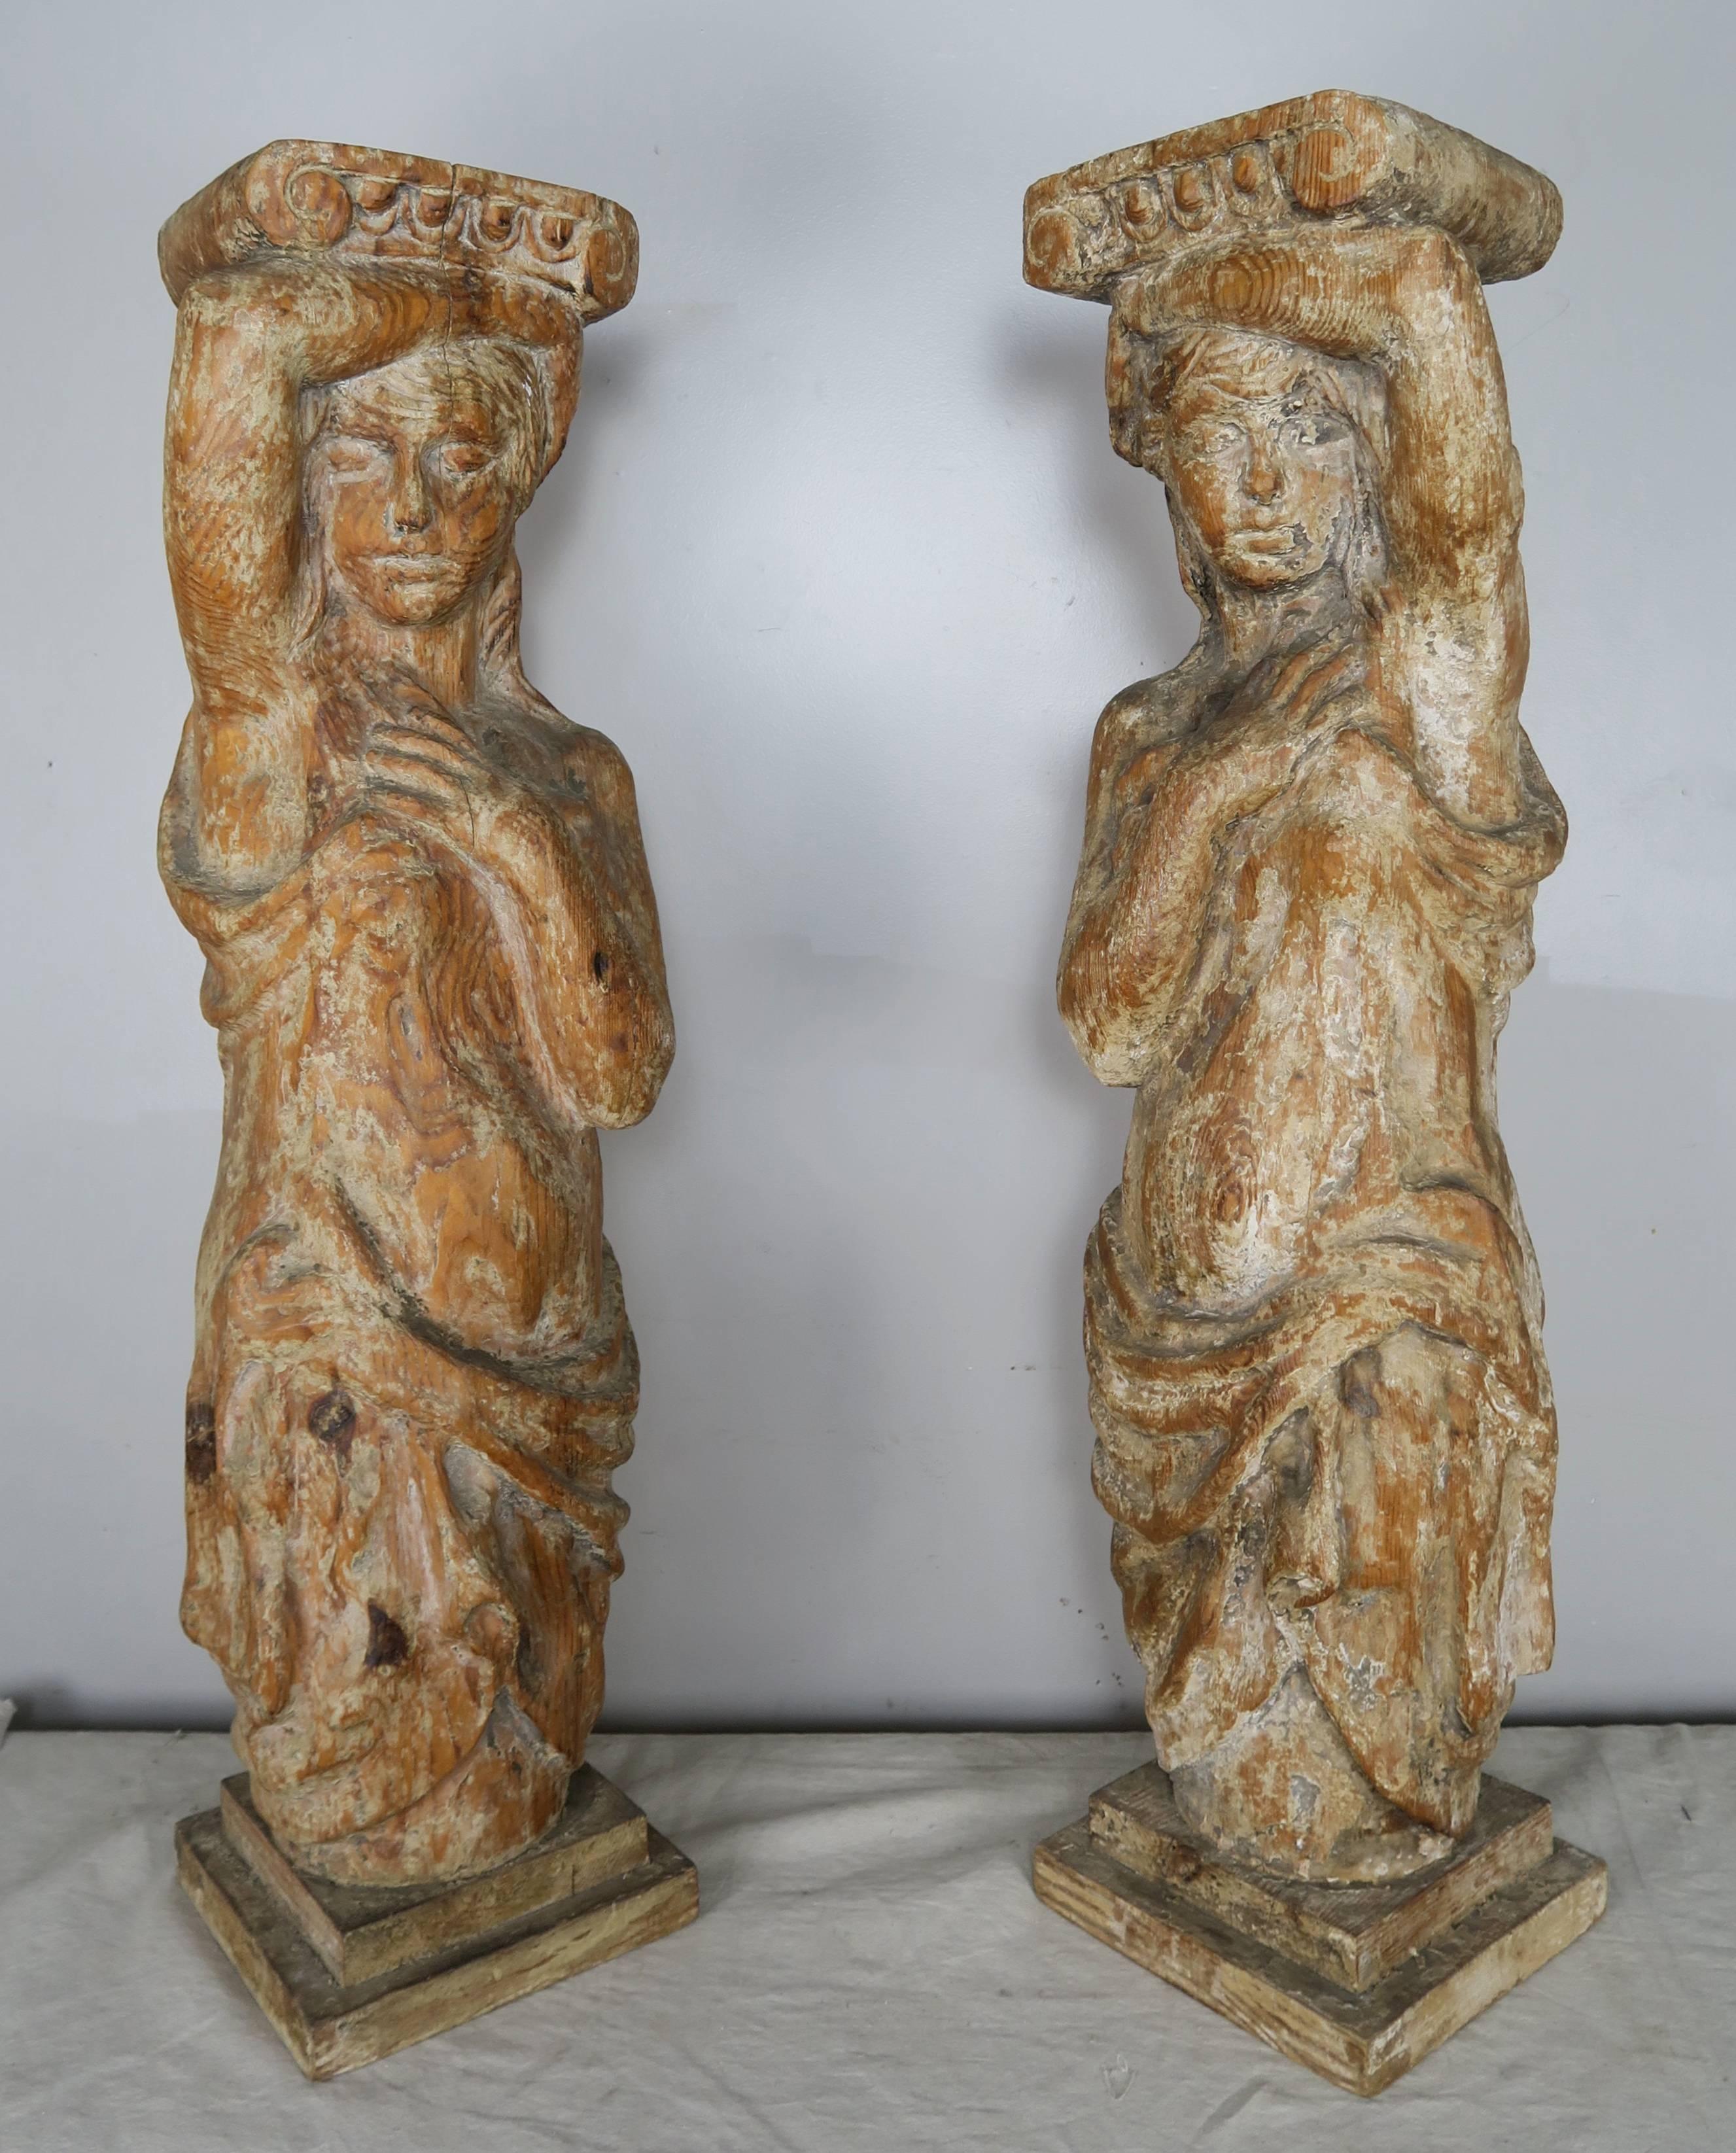 Pair of beautiful Spanish opposed carved wood figural pedestals. The pedestal can be used to hold planters of chunky candles. The pair of pedestals could also be the base to a console table or sofa back table.